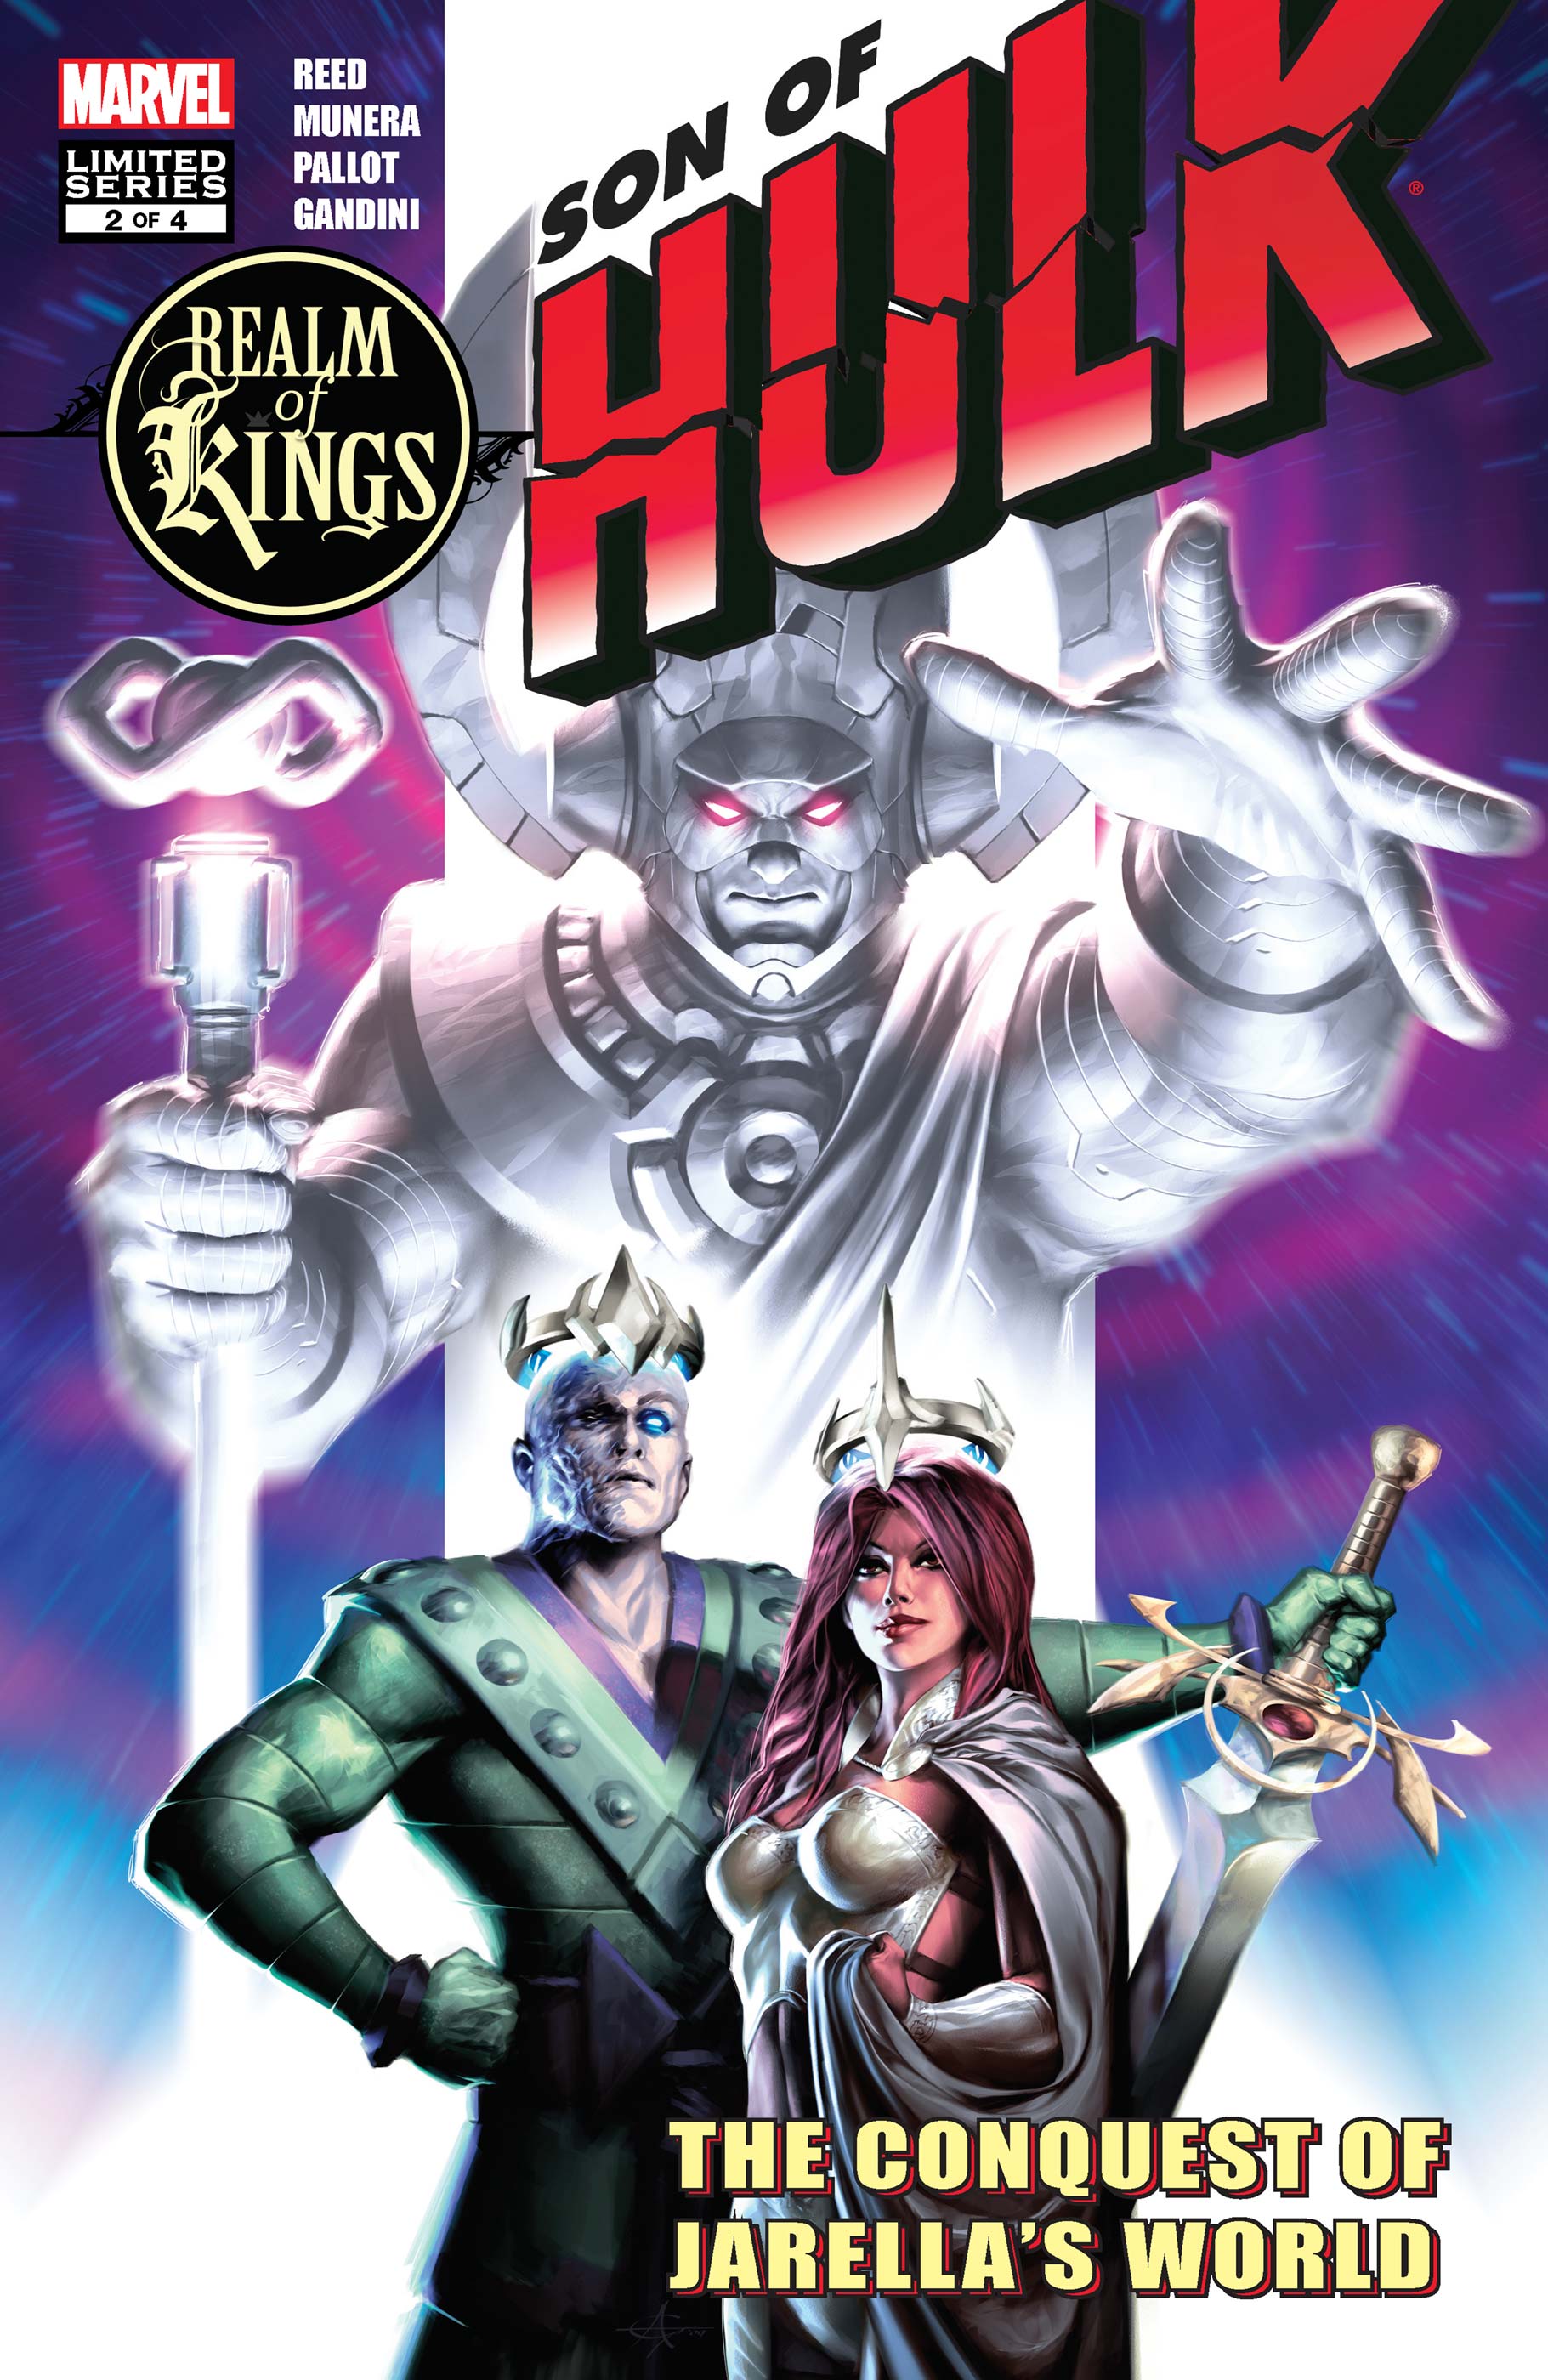 Realm of Kings: Son of Hulk (2010) #2